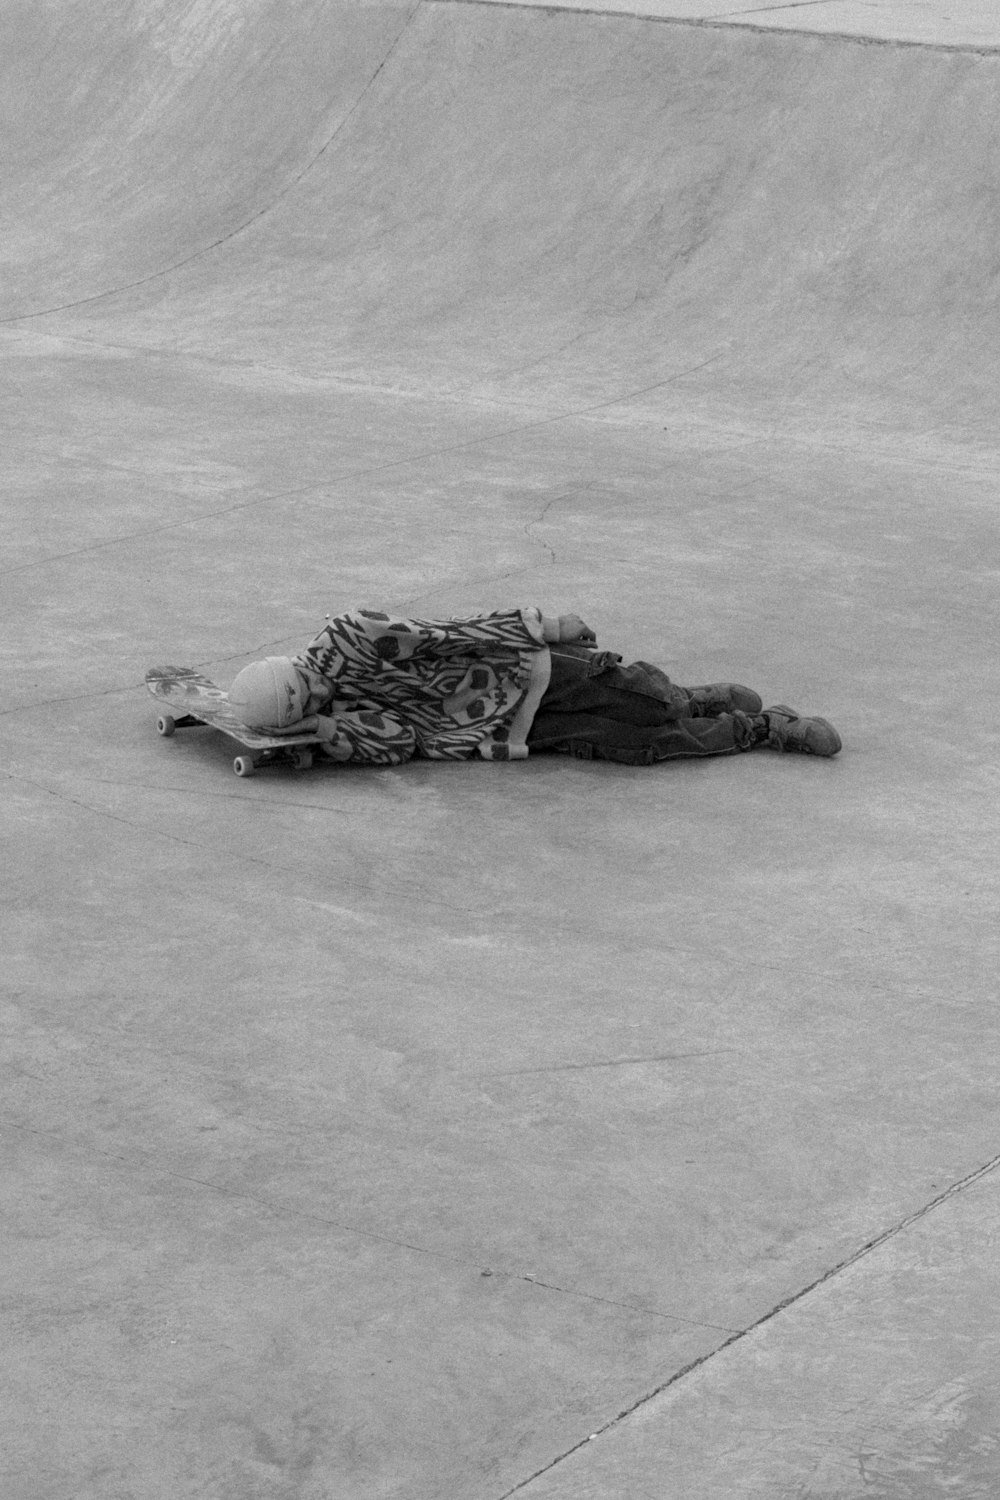 a person laying on a skateboard in a skate park